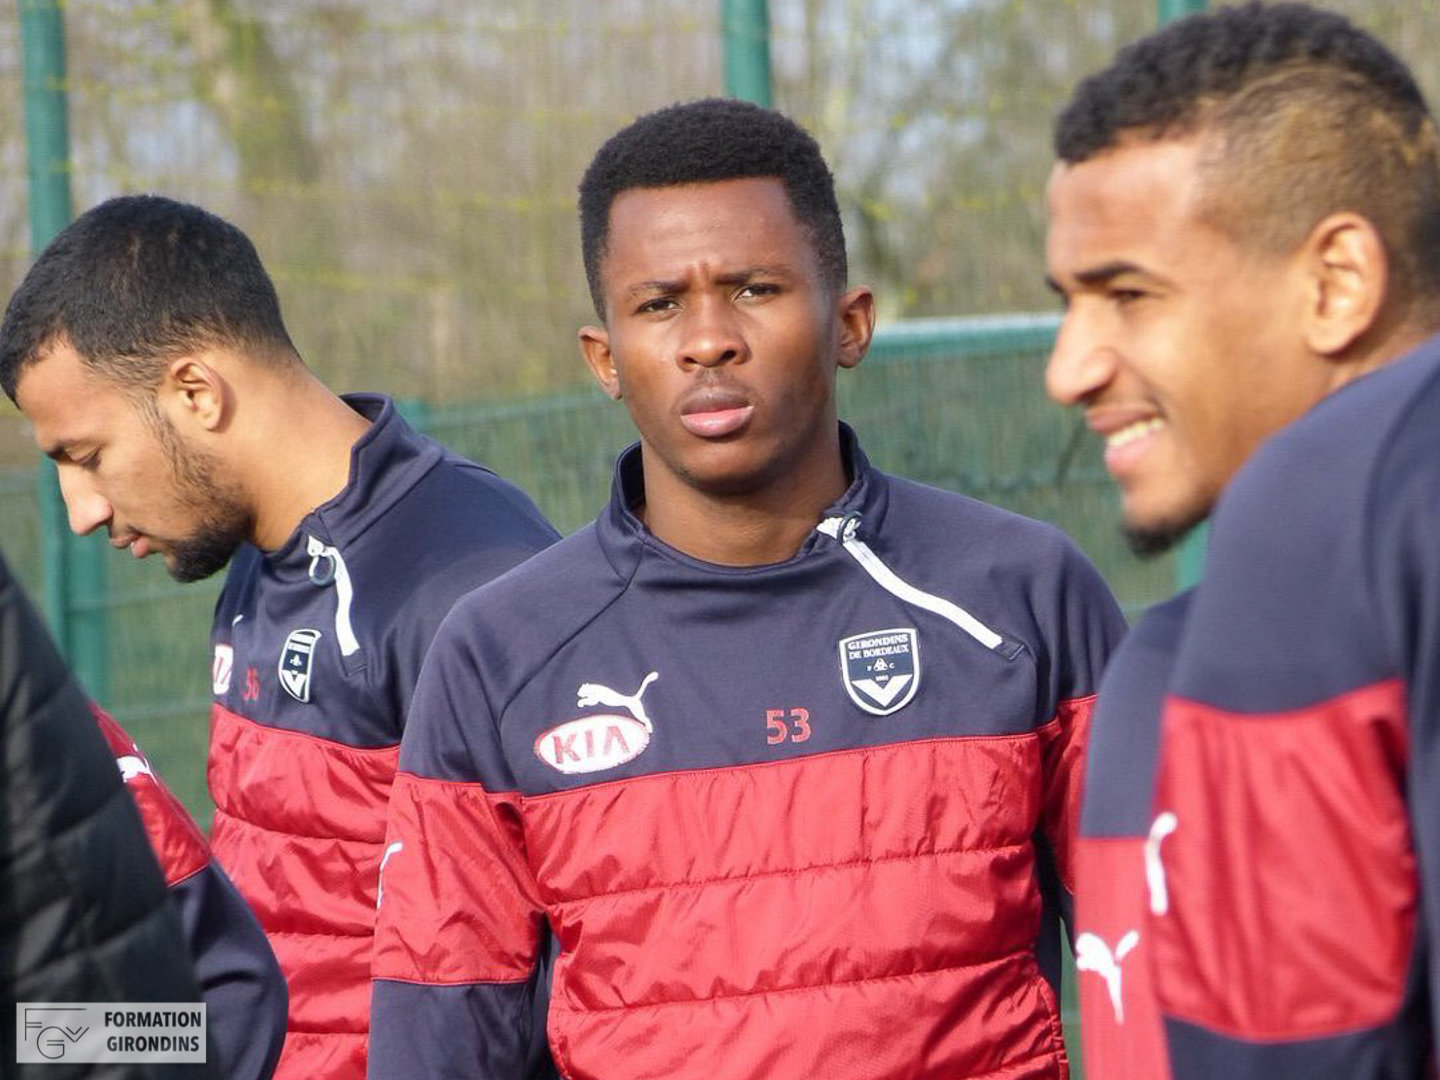 Actualités : Kévin Zinga s'engage avec le GFA Rumilly Vallieres - Formation Girondins 